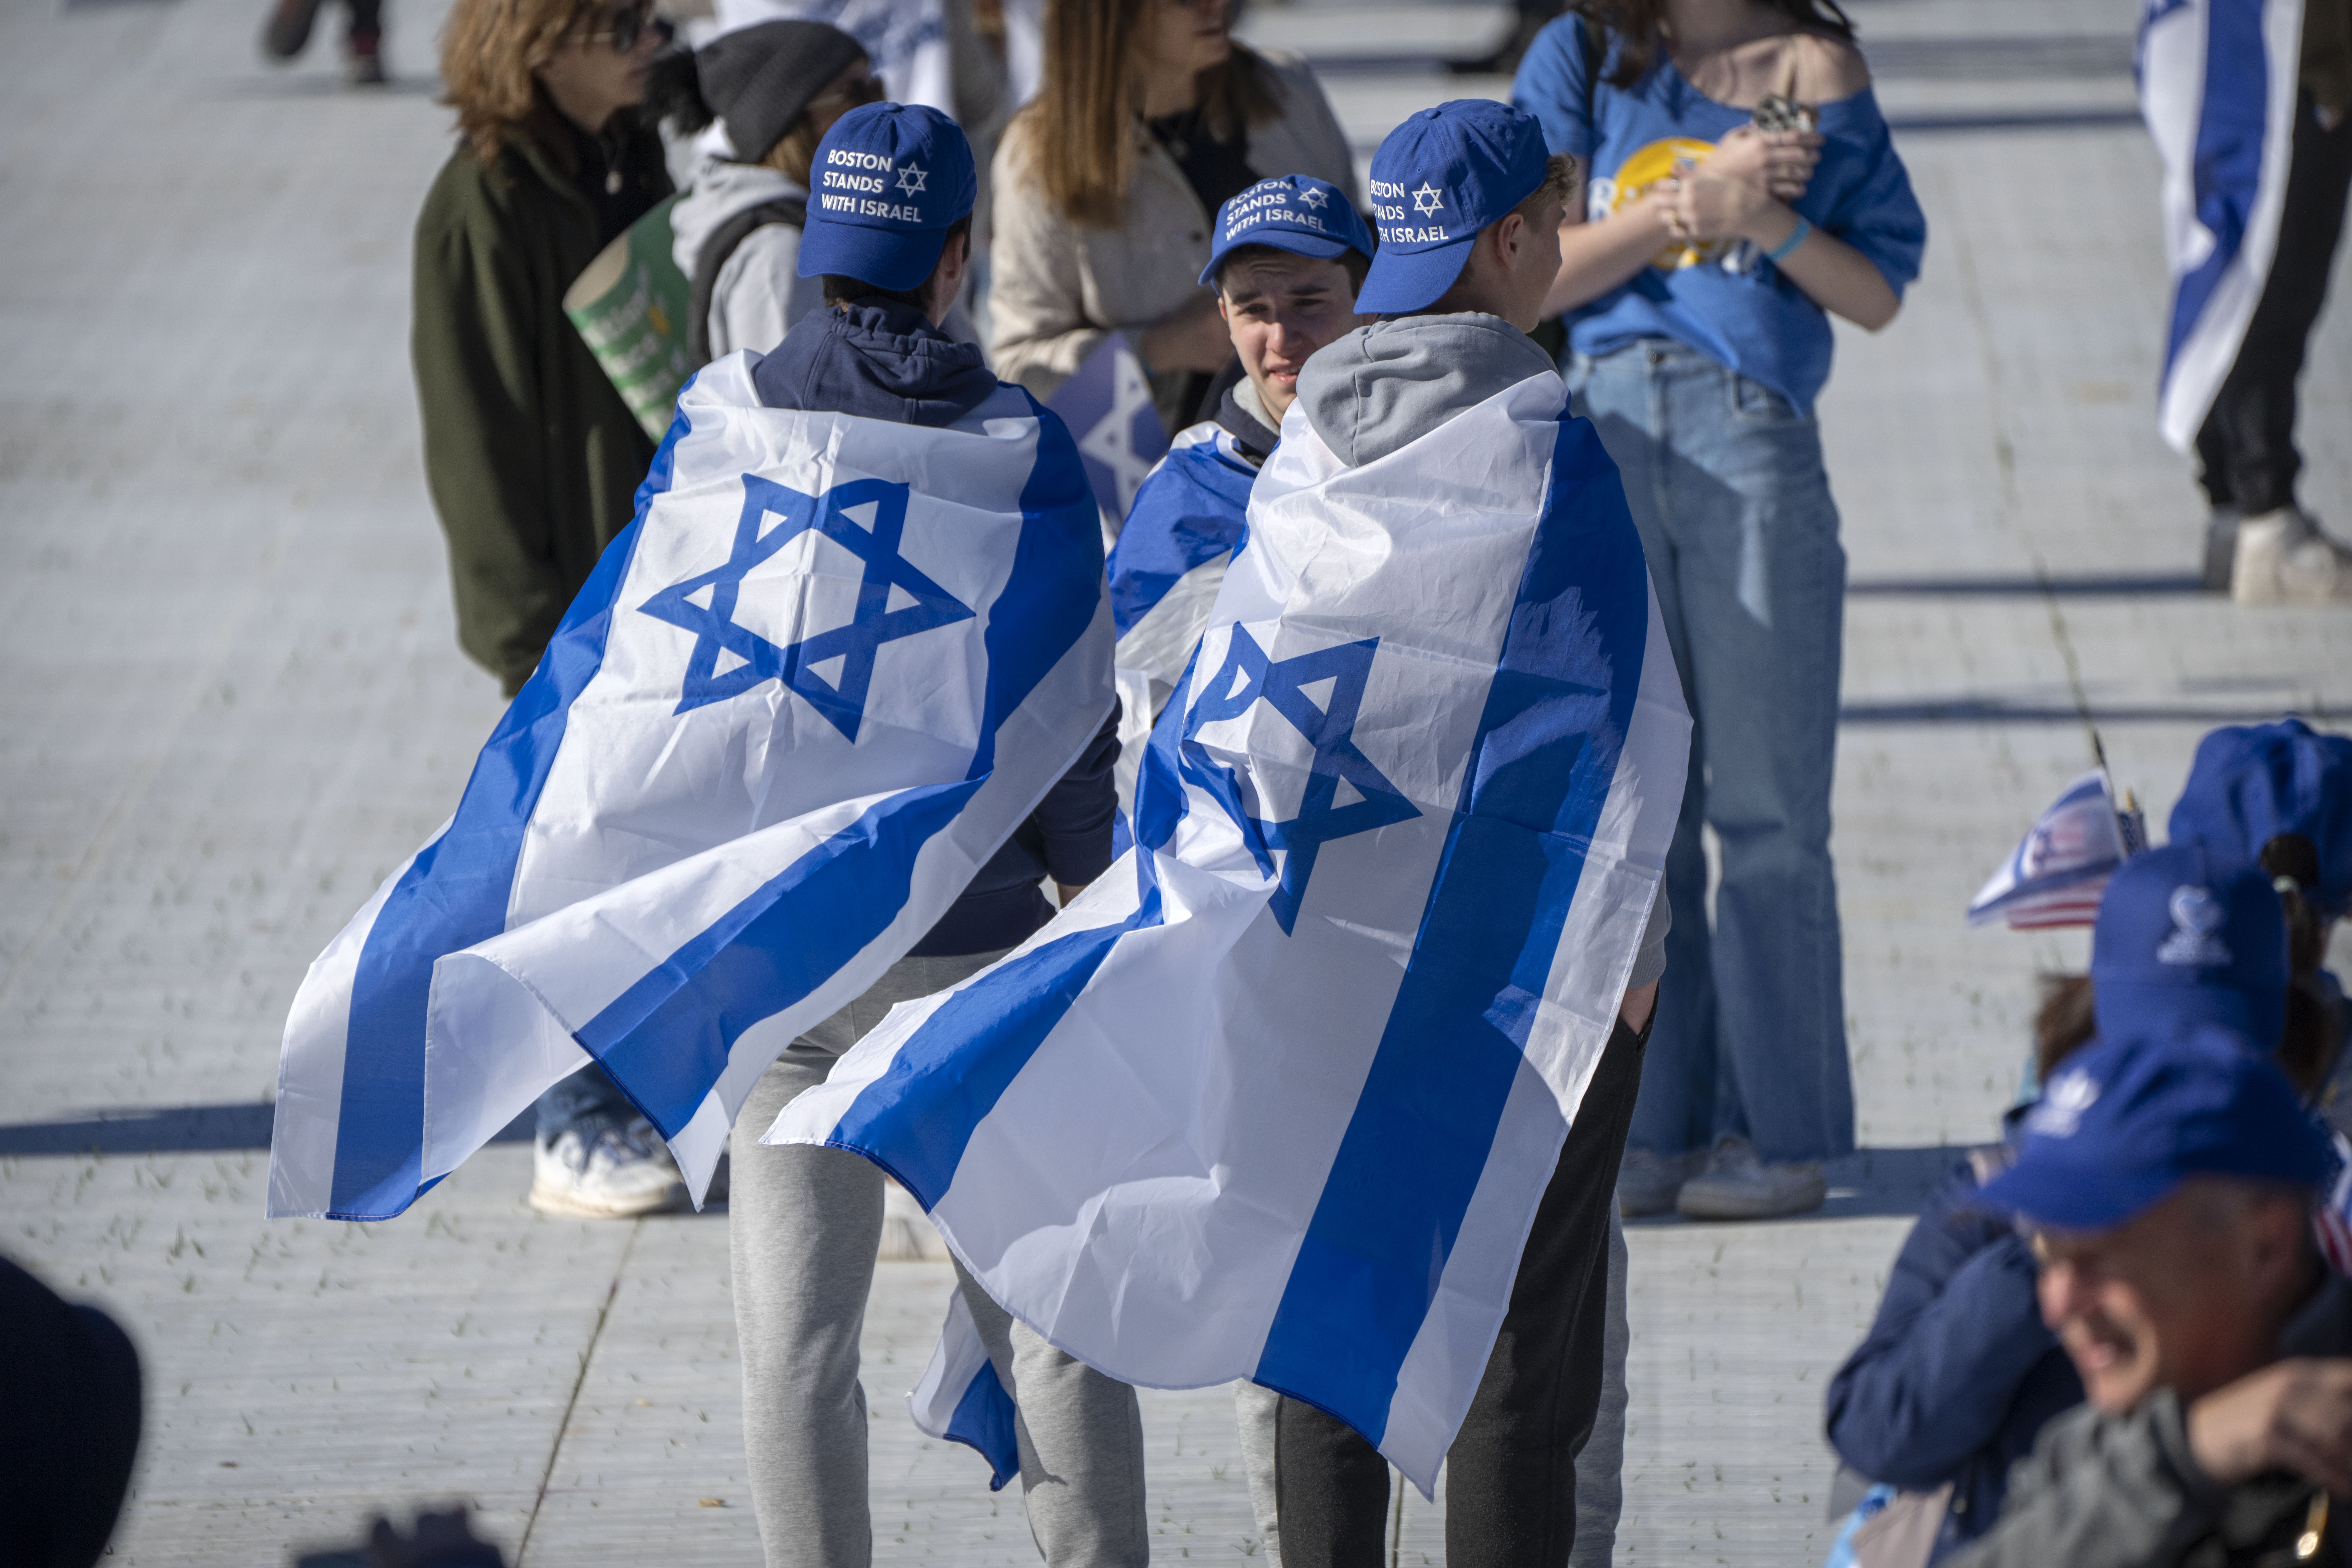 See photos from the ‘March for Israel' rally in Washington, D.C.